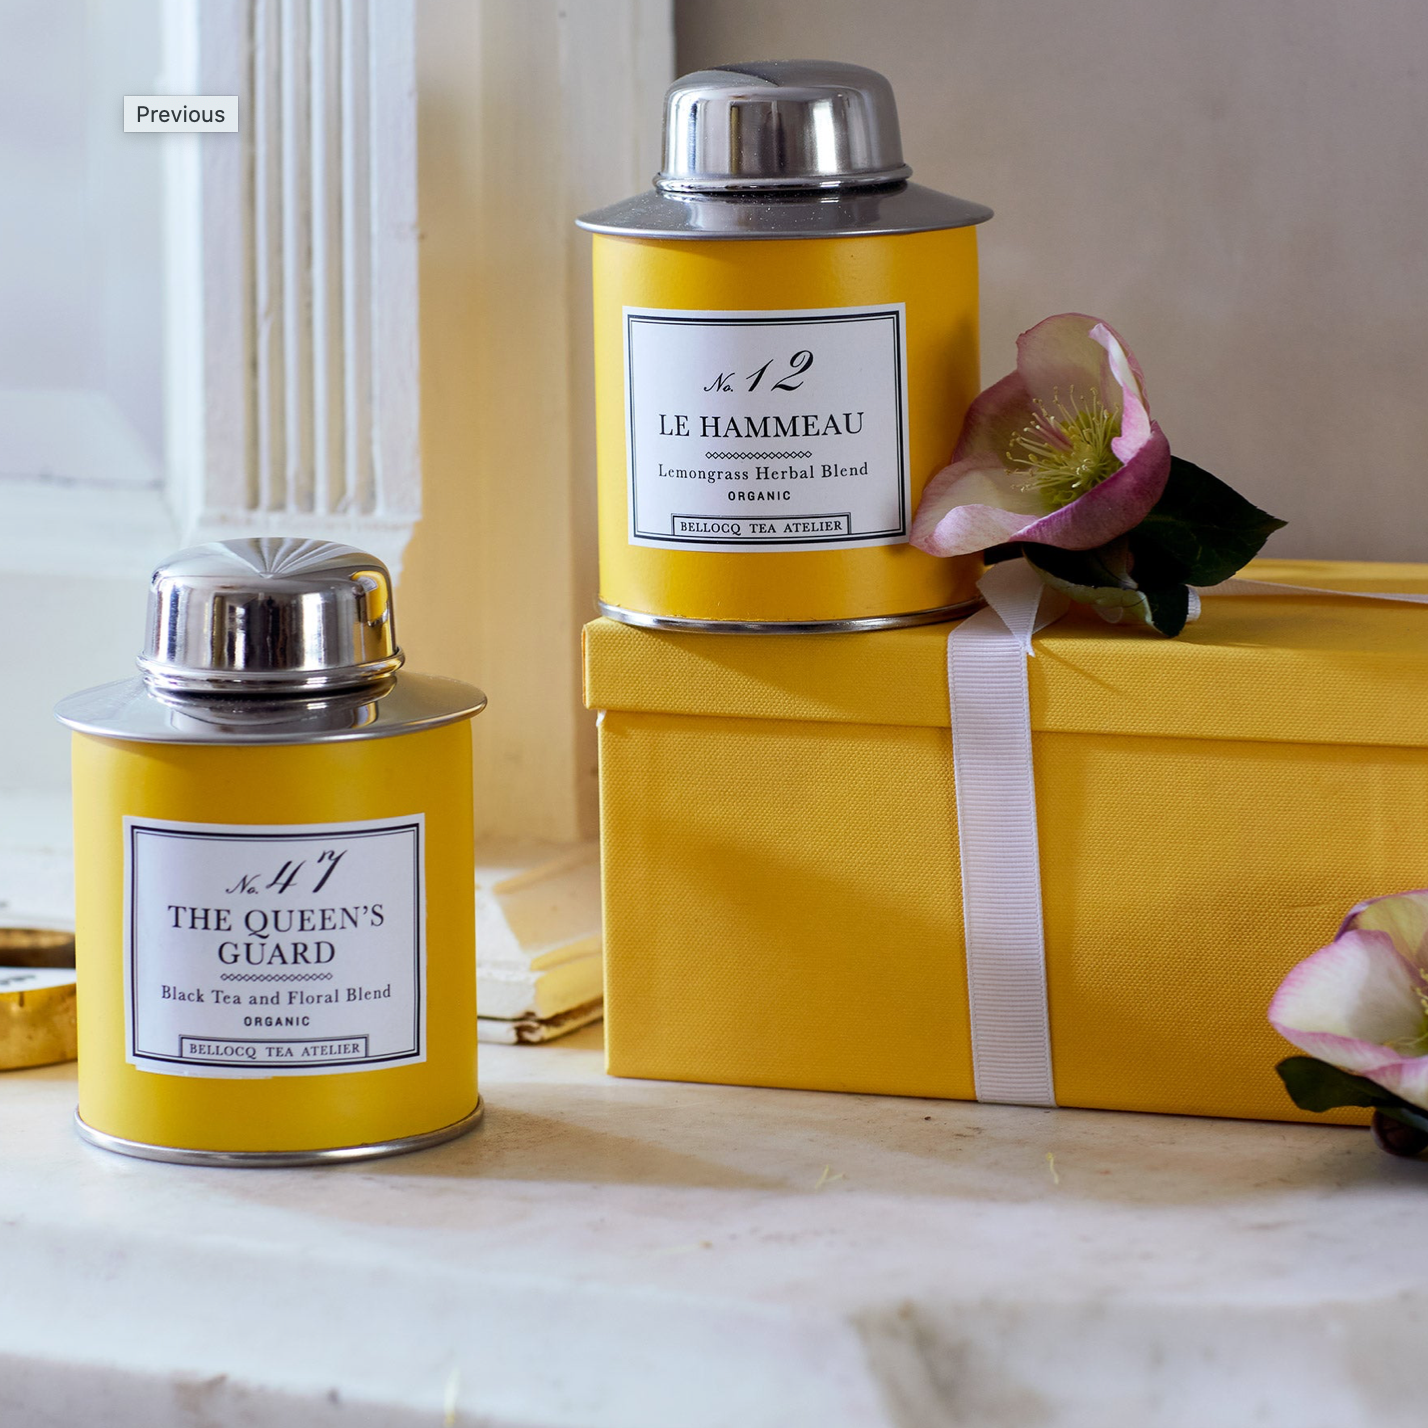 BELLOCQ AFTERNOON COLLECTION GIFT BOX by THE MORE THE HAPPIER